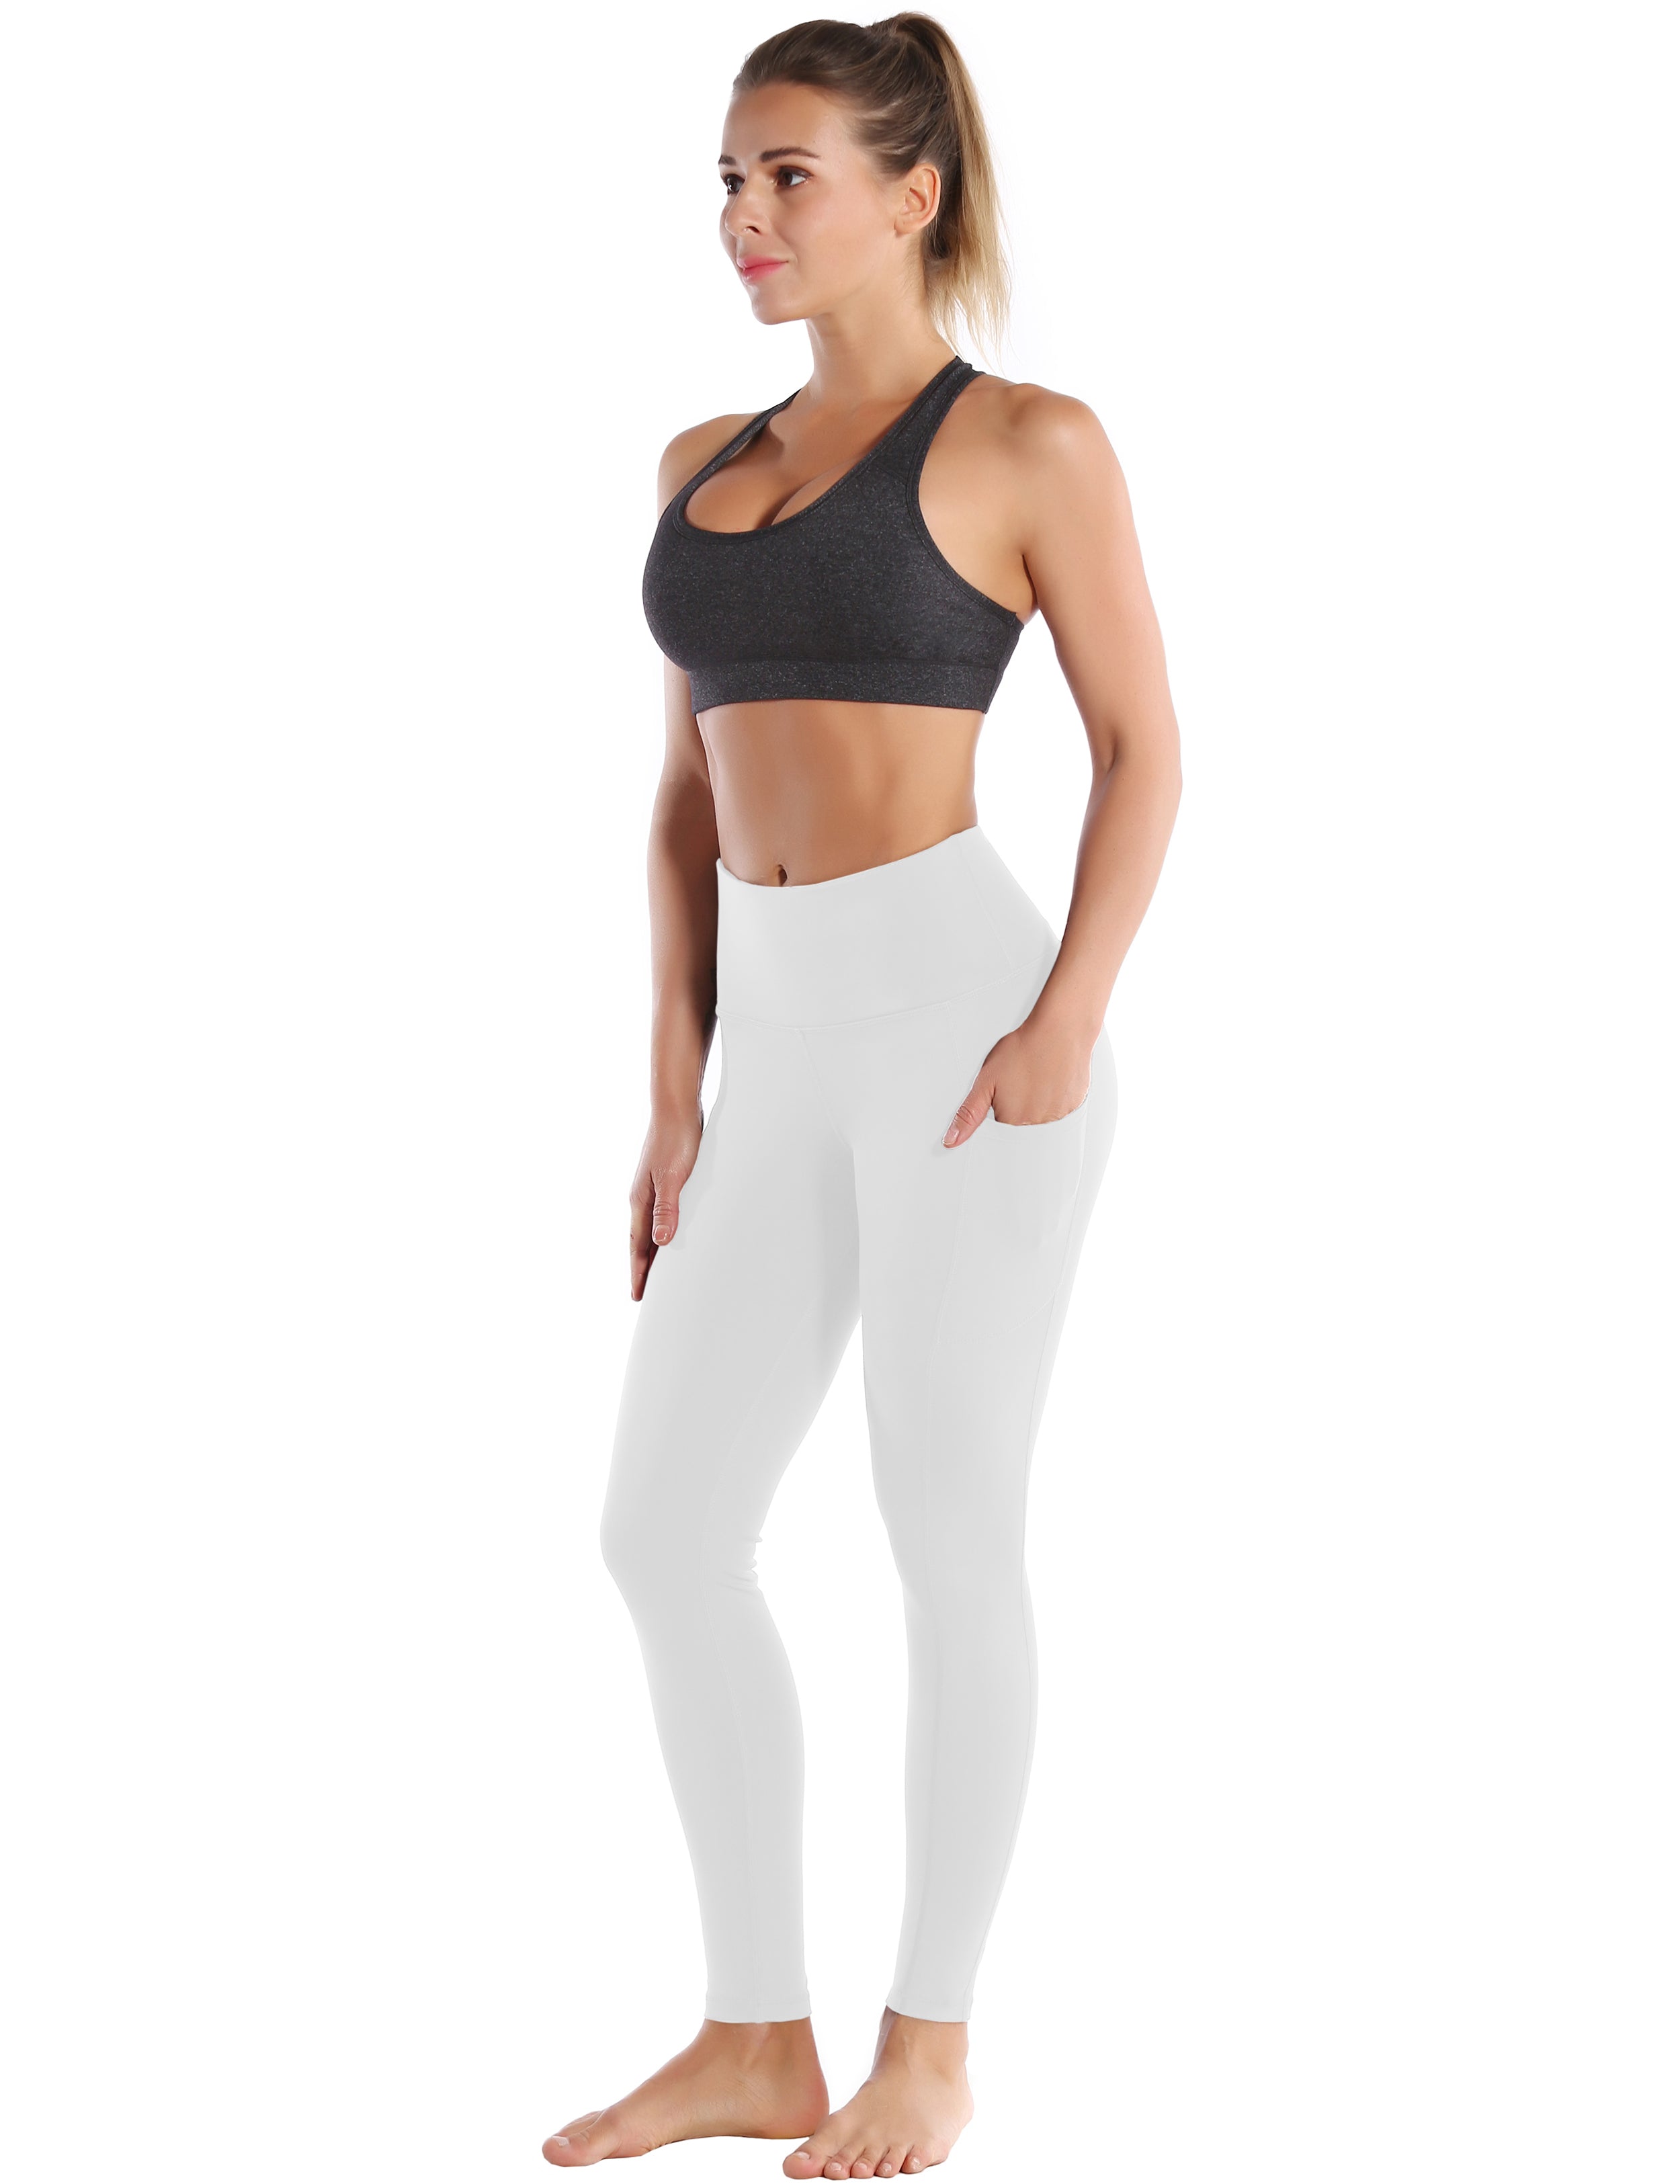 Hip Line Side Pockets Yoga Pants lightgray Sexy Hip Line Side Pockets 75%Nylon/25%Spandex Fabric doesn't attract lint easily 4-way stretch No see-through Moisture-wicking Tummy control Inner pocket Two lengths